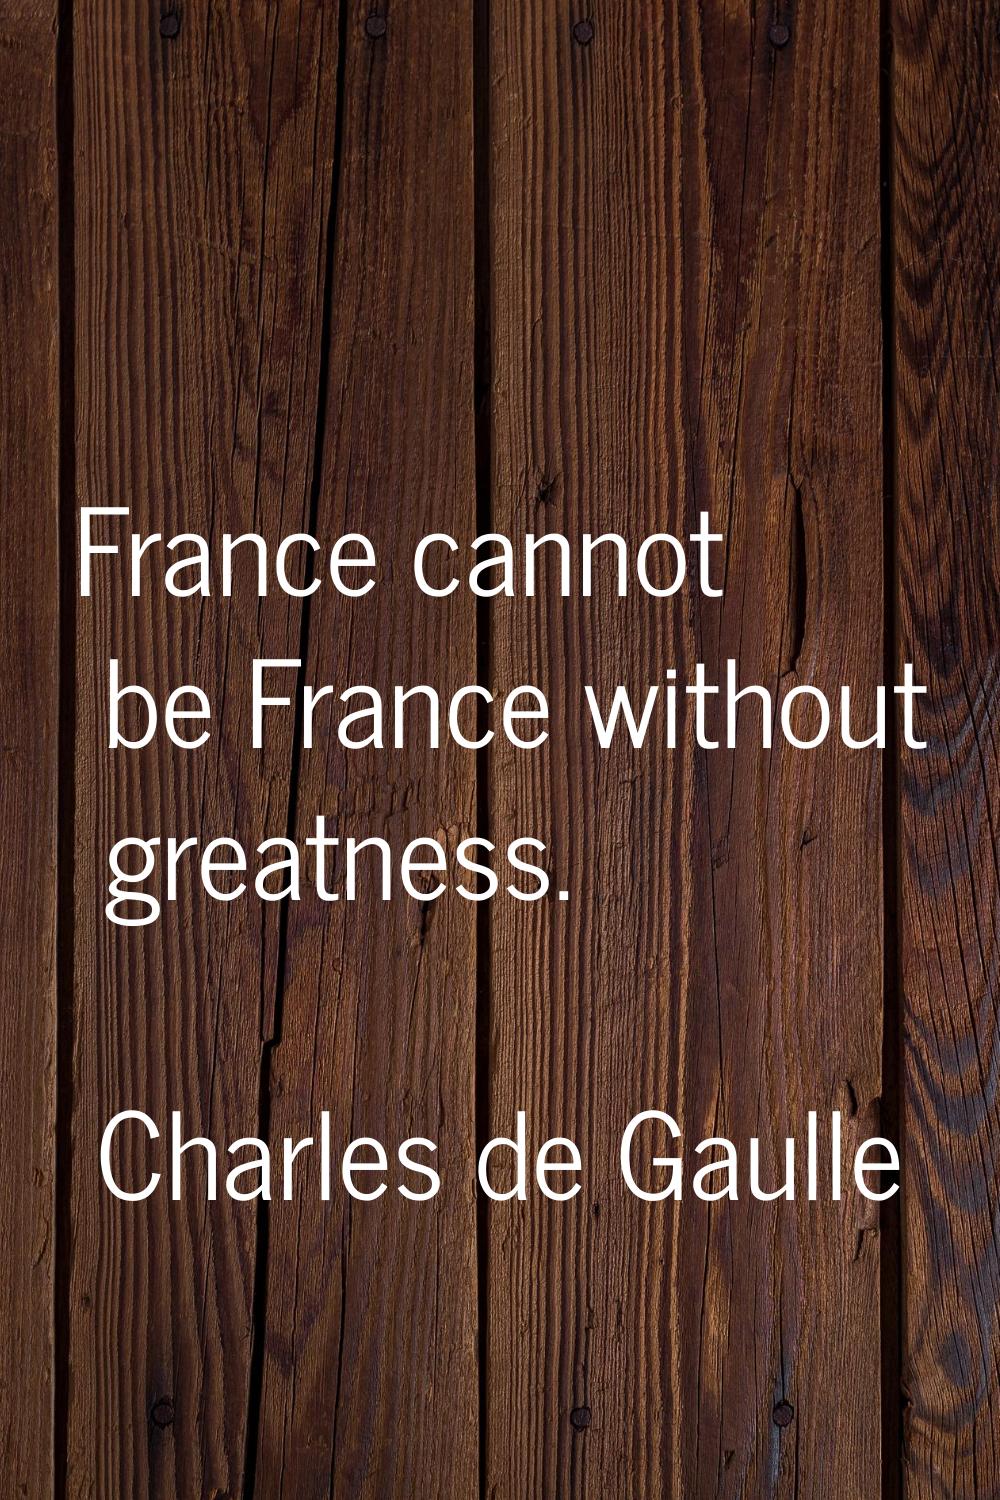 France cannot be France without greatness.